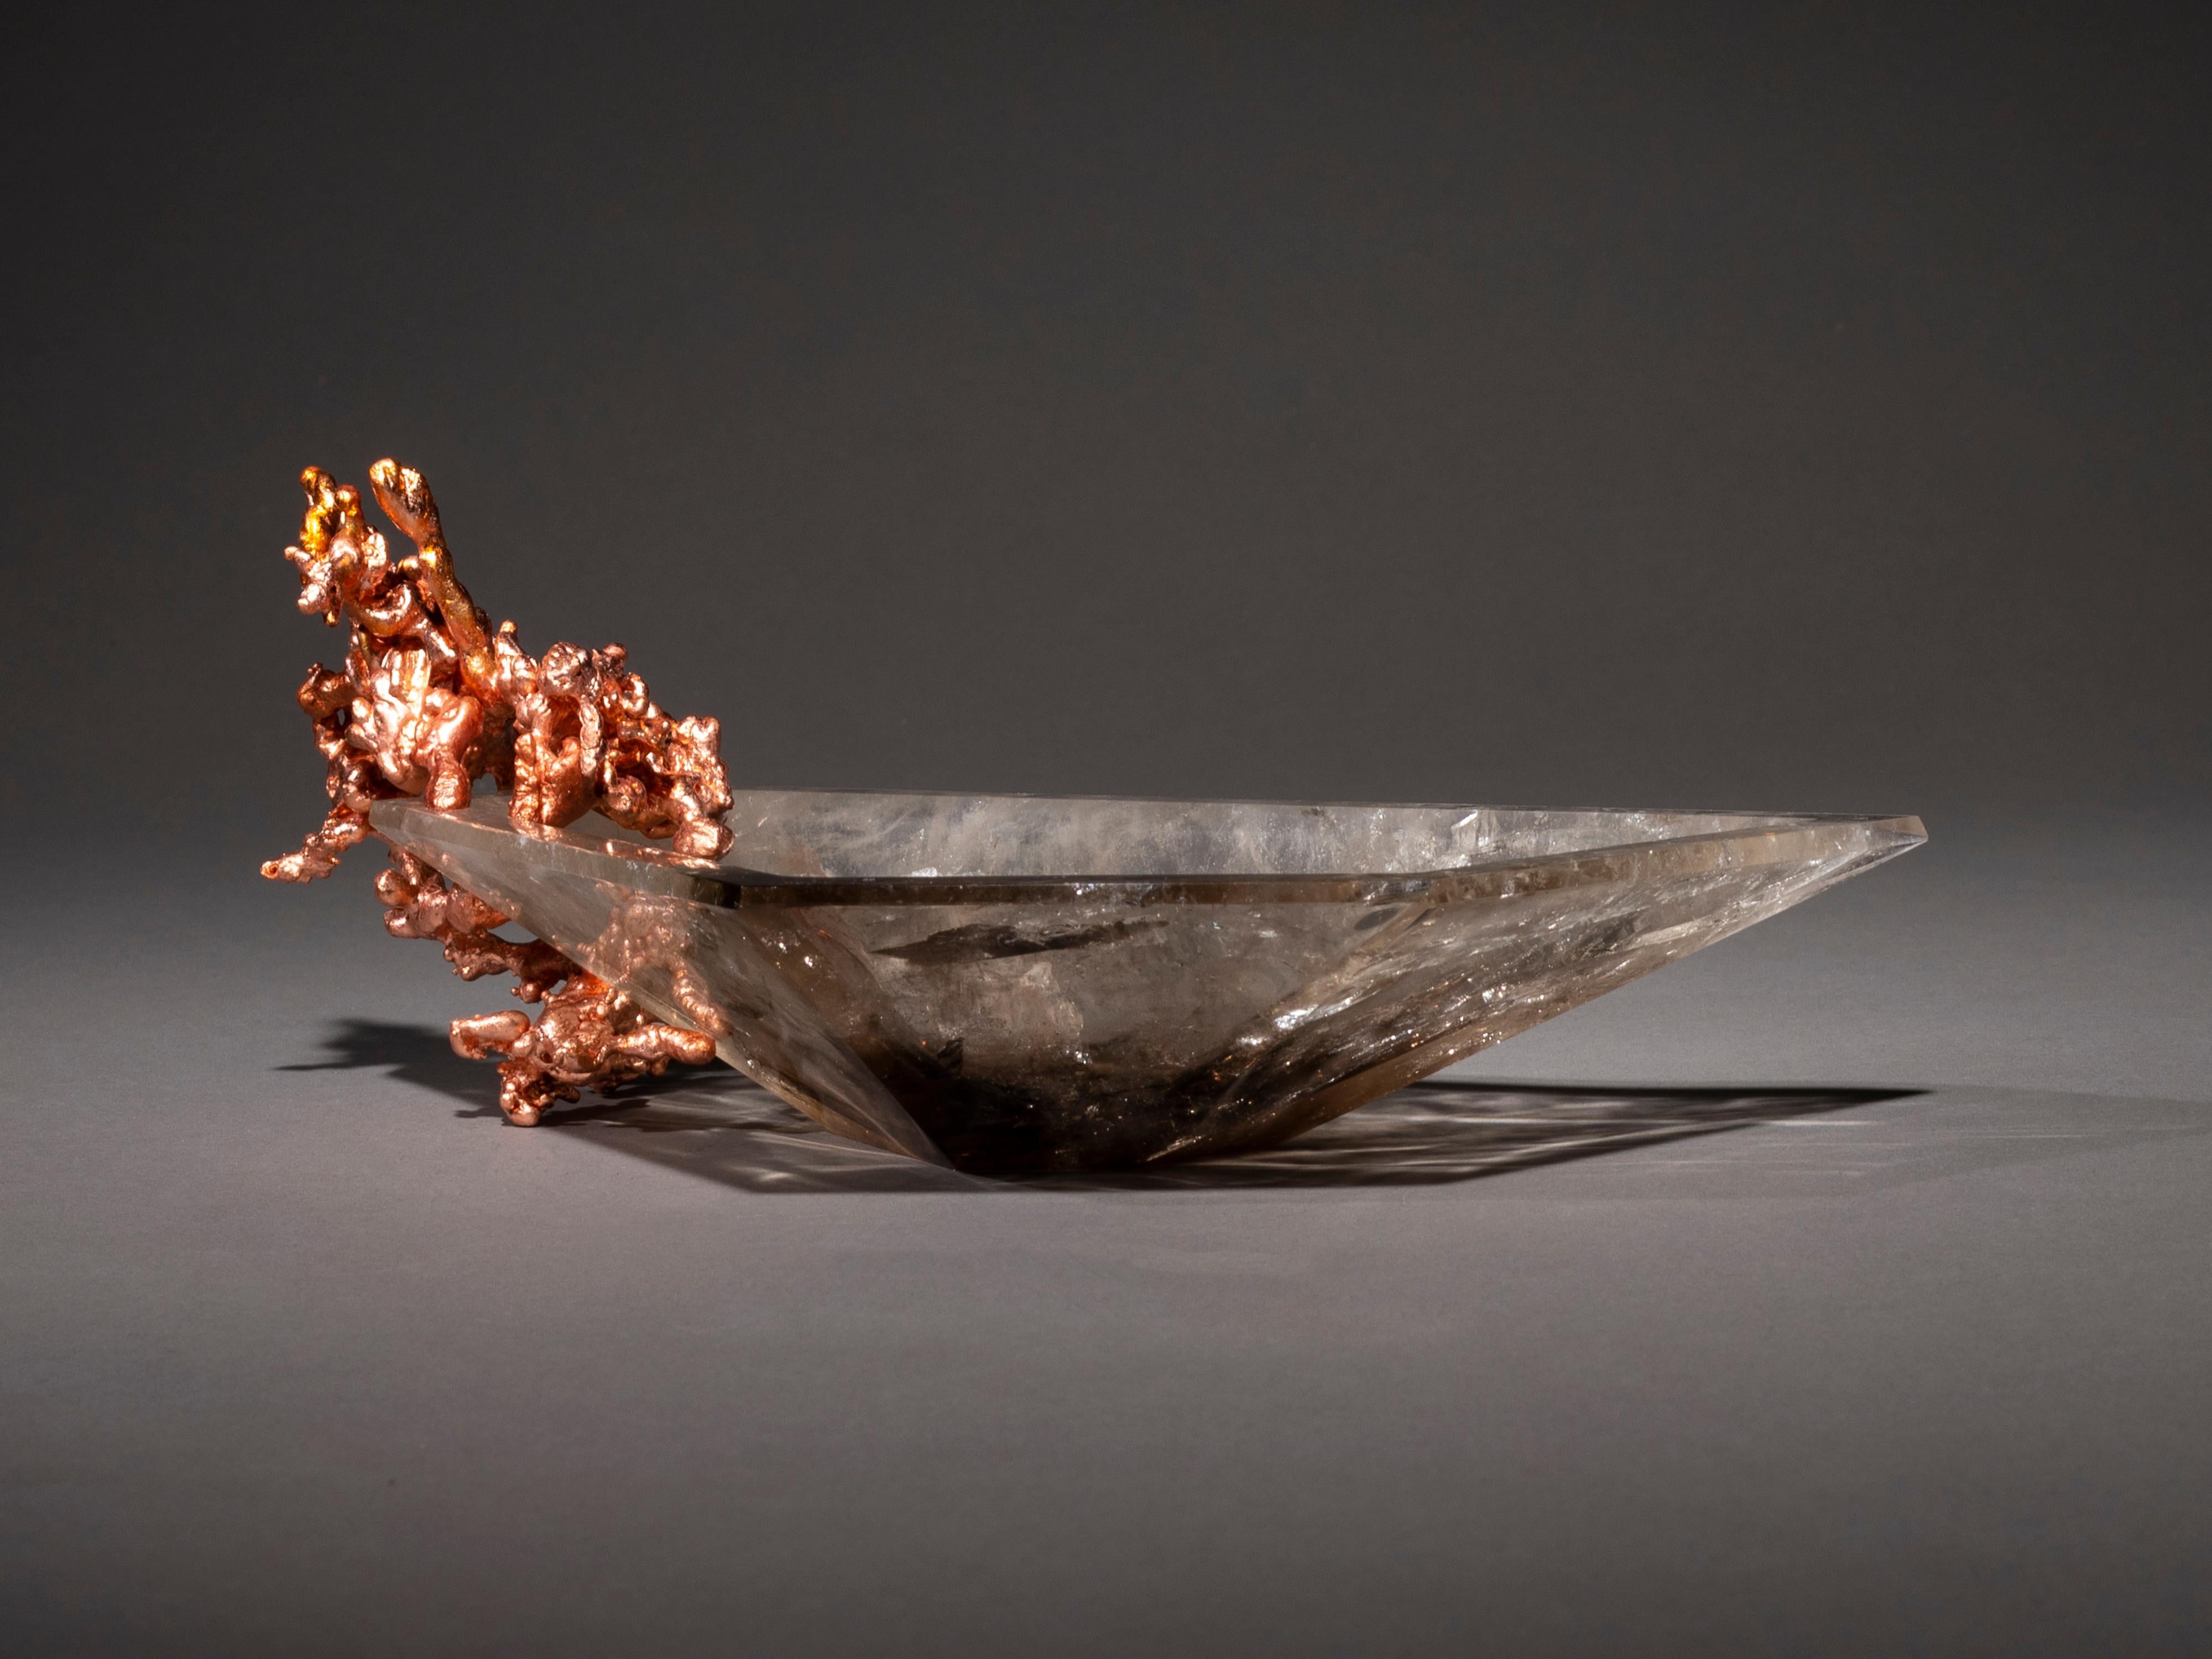 When lava spills down from a volcano into bodies of water or is pushed up from craters below, it creates islands of new earth that change our landscape forever. Studio Greytak’s Crystal Bling Bowl 37 mimics this molten flow of creation with abstract